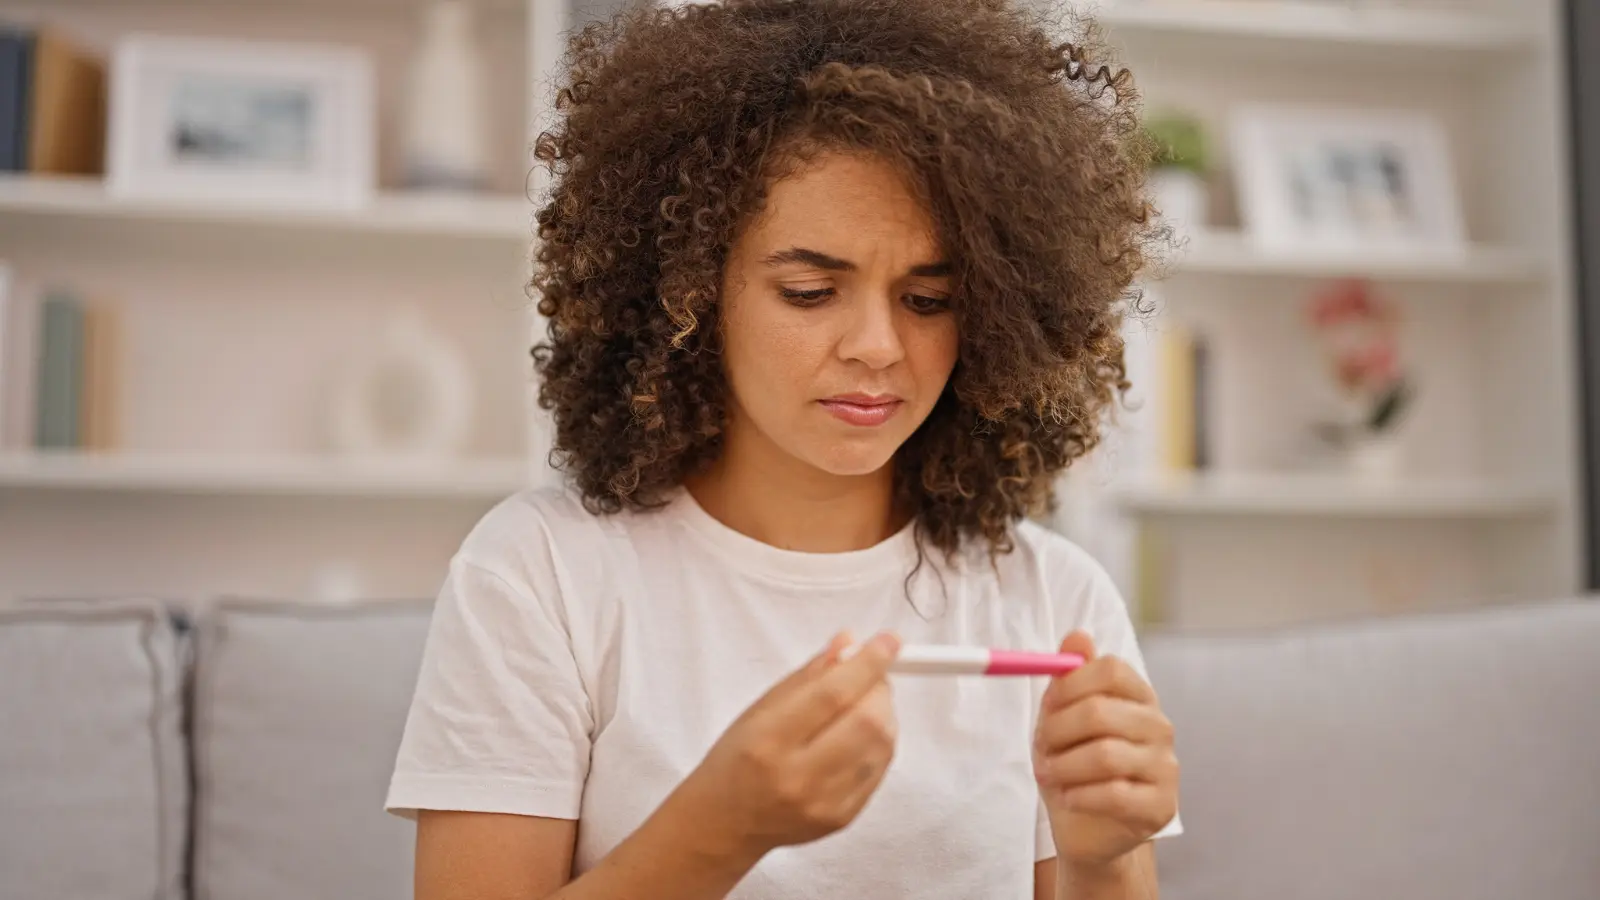 Post-Adoption Counseling a woman looking at pregnancy test with serious expression